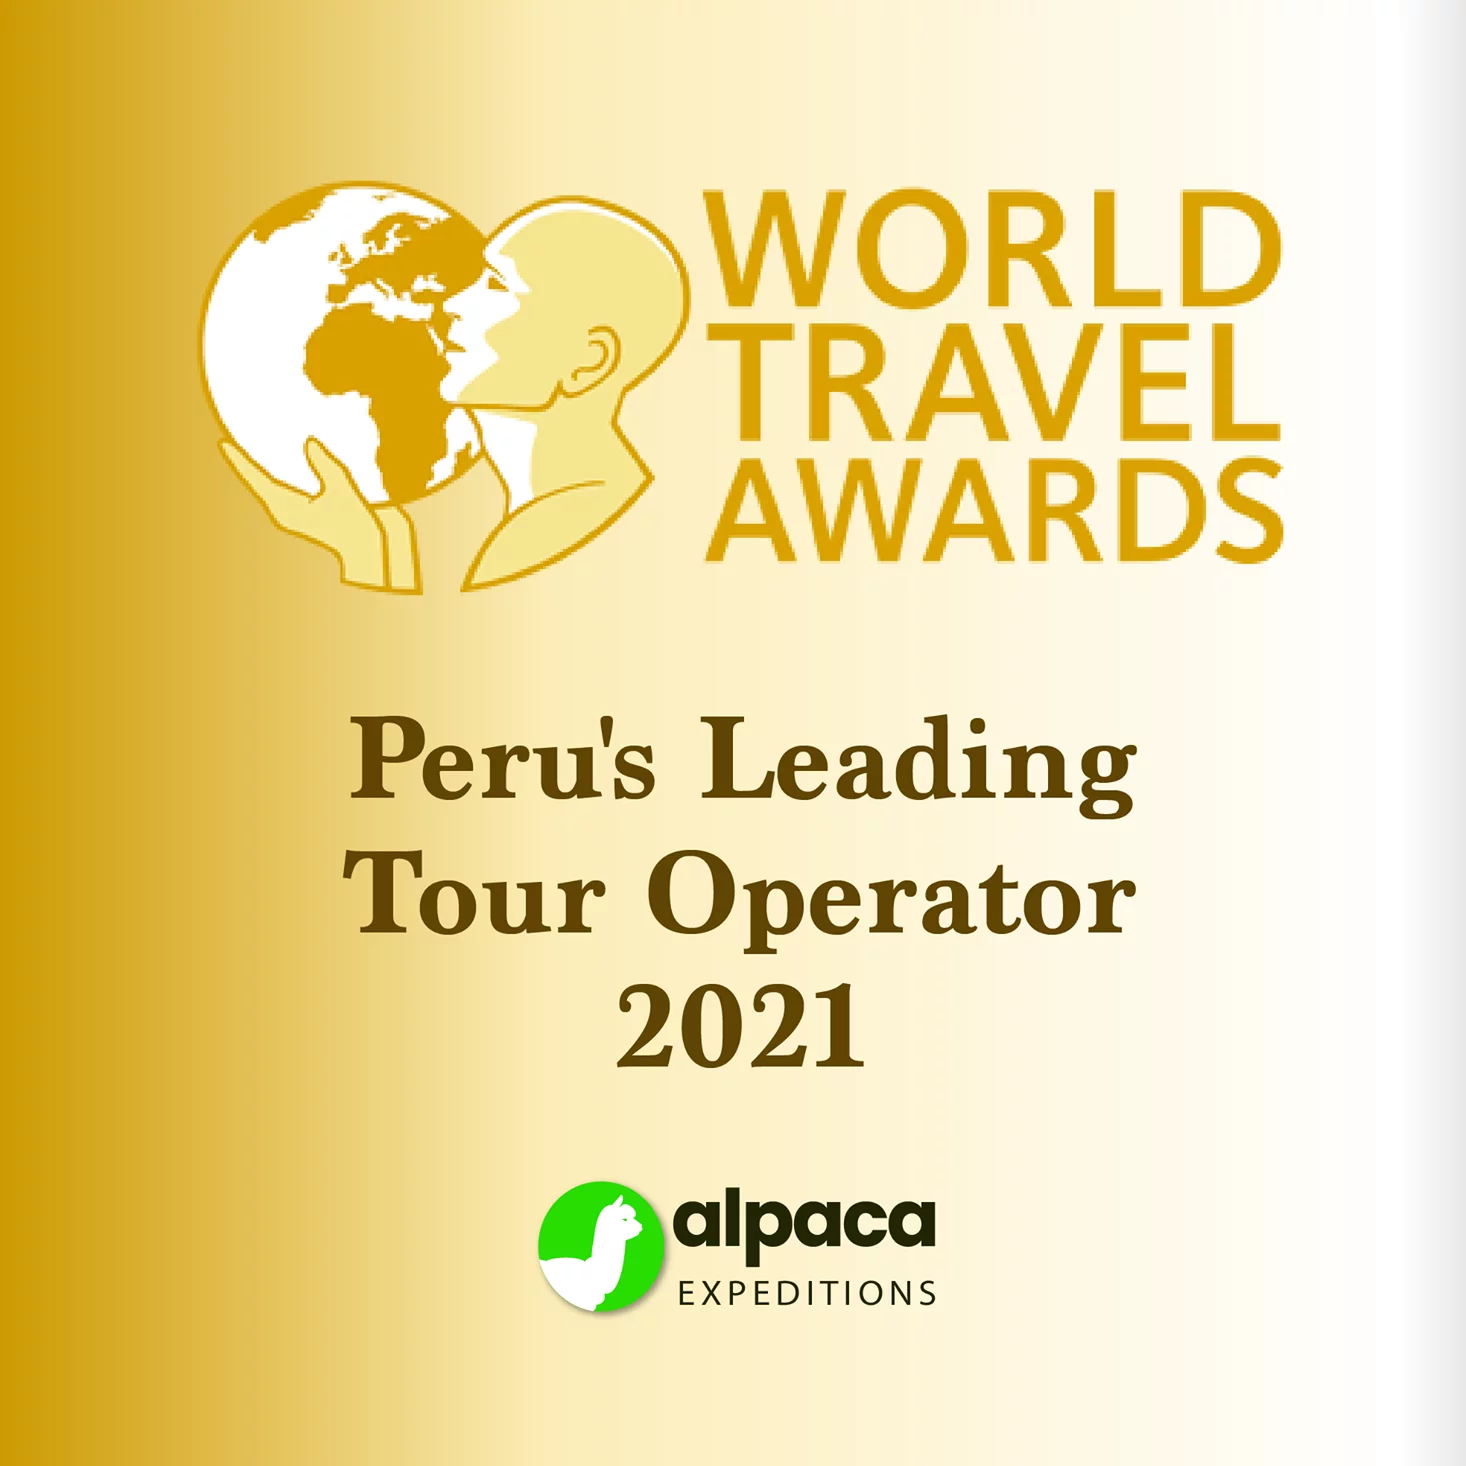 Alpaca Expeditions is one of Peru's Leading Tour Operators